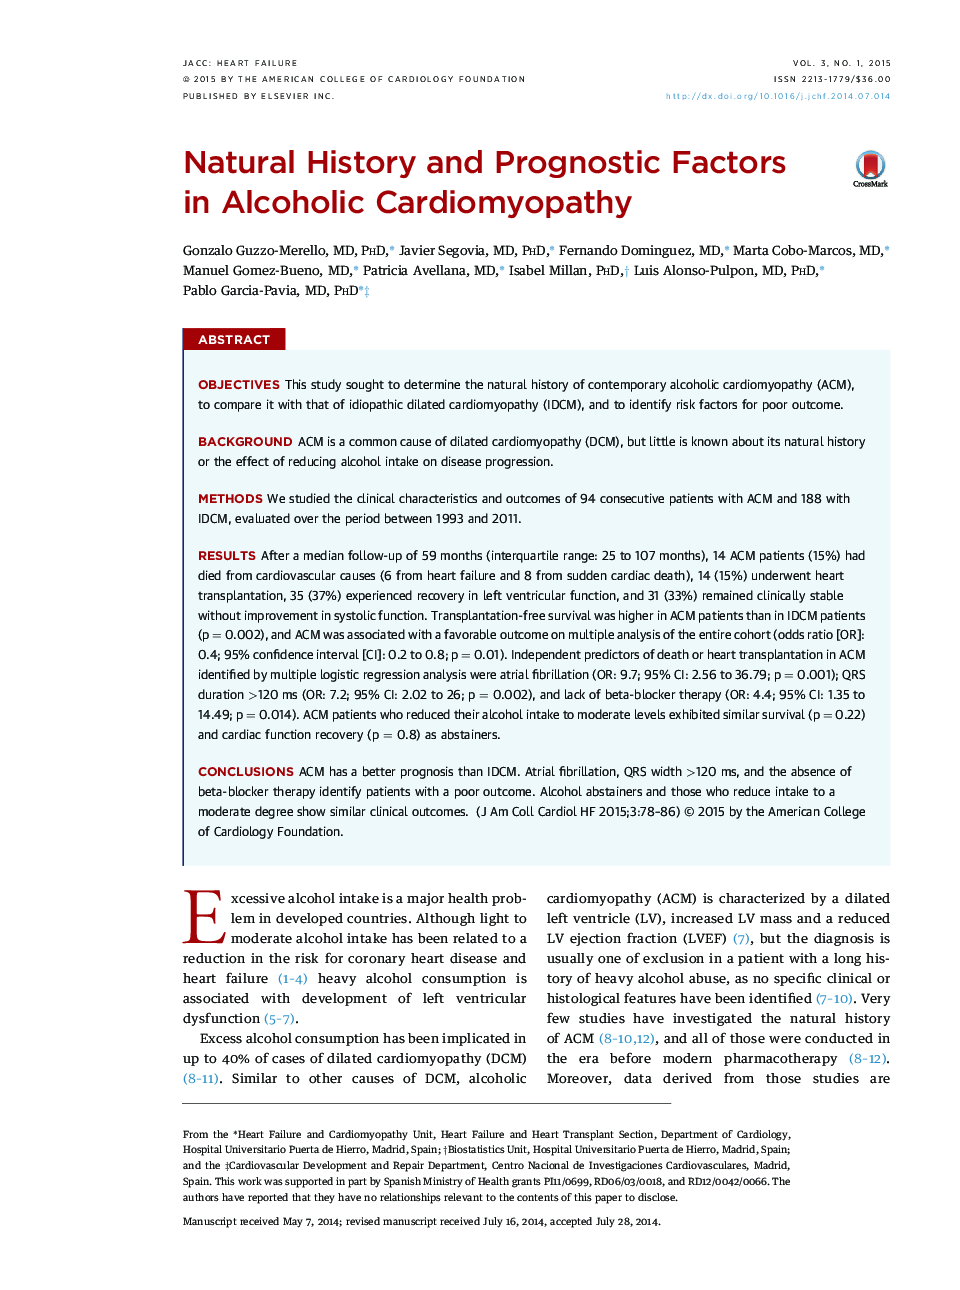 Natural History and Prognostic Factors in Alcoholic Cardiomyopathy